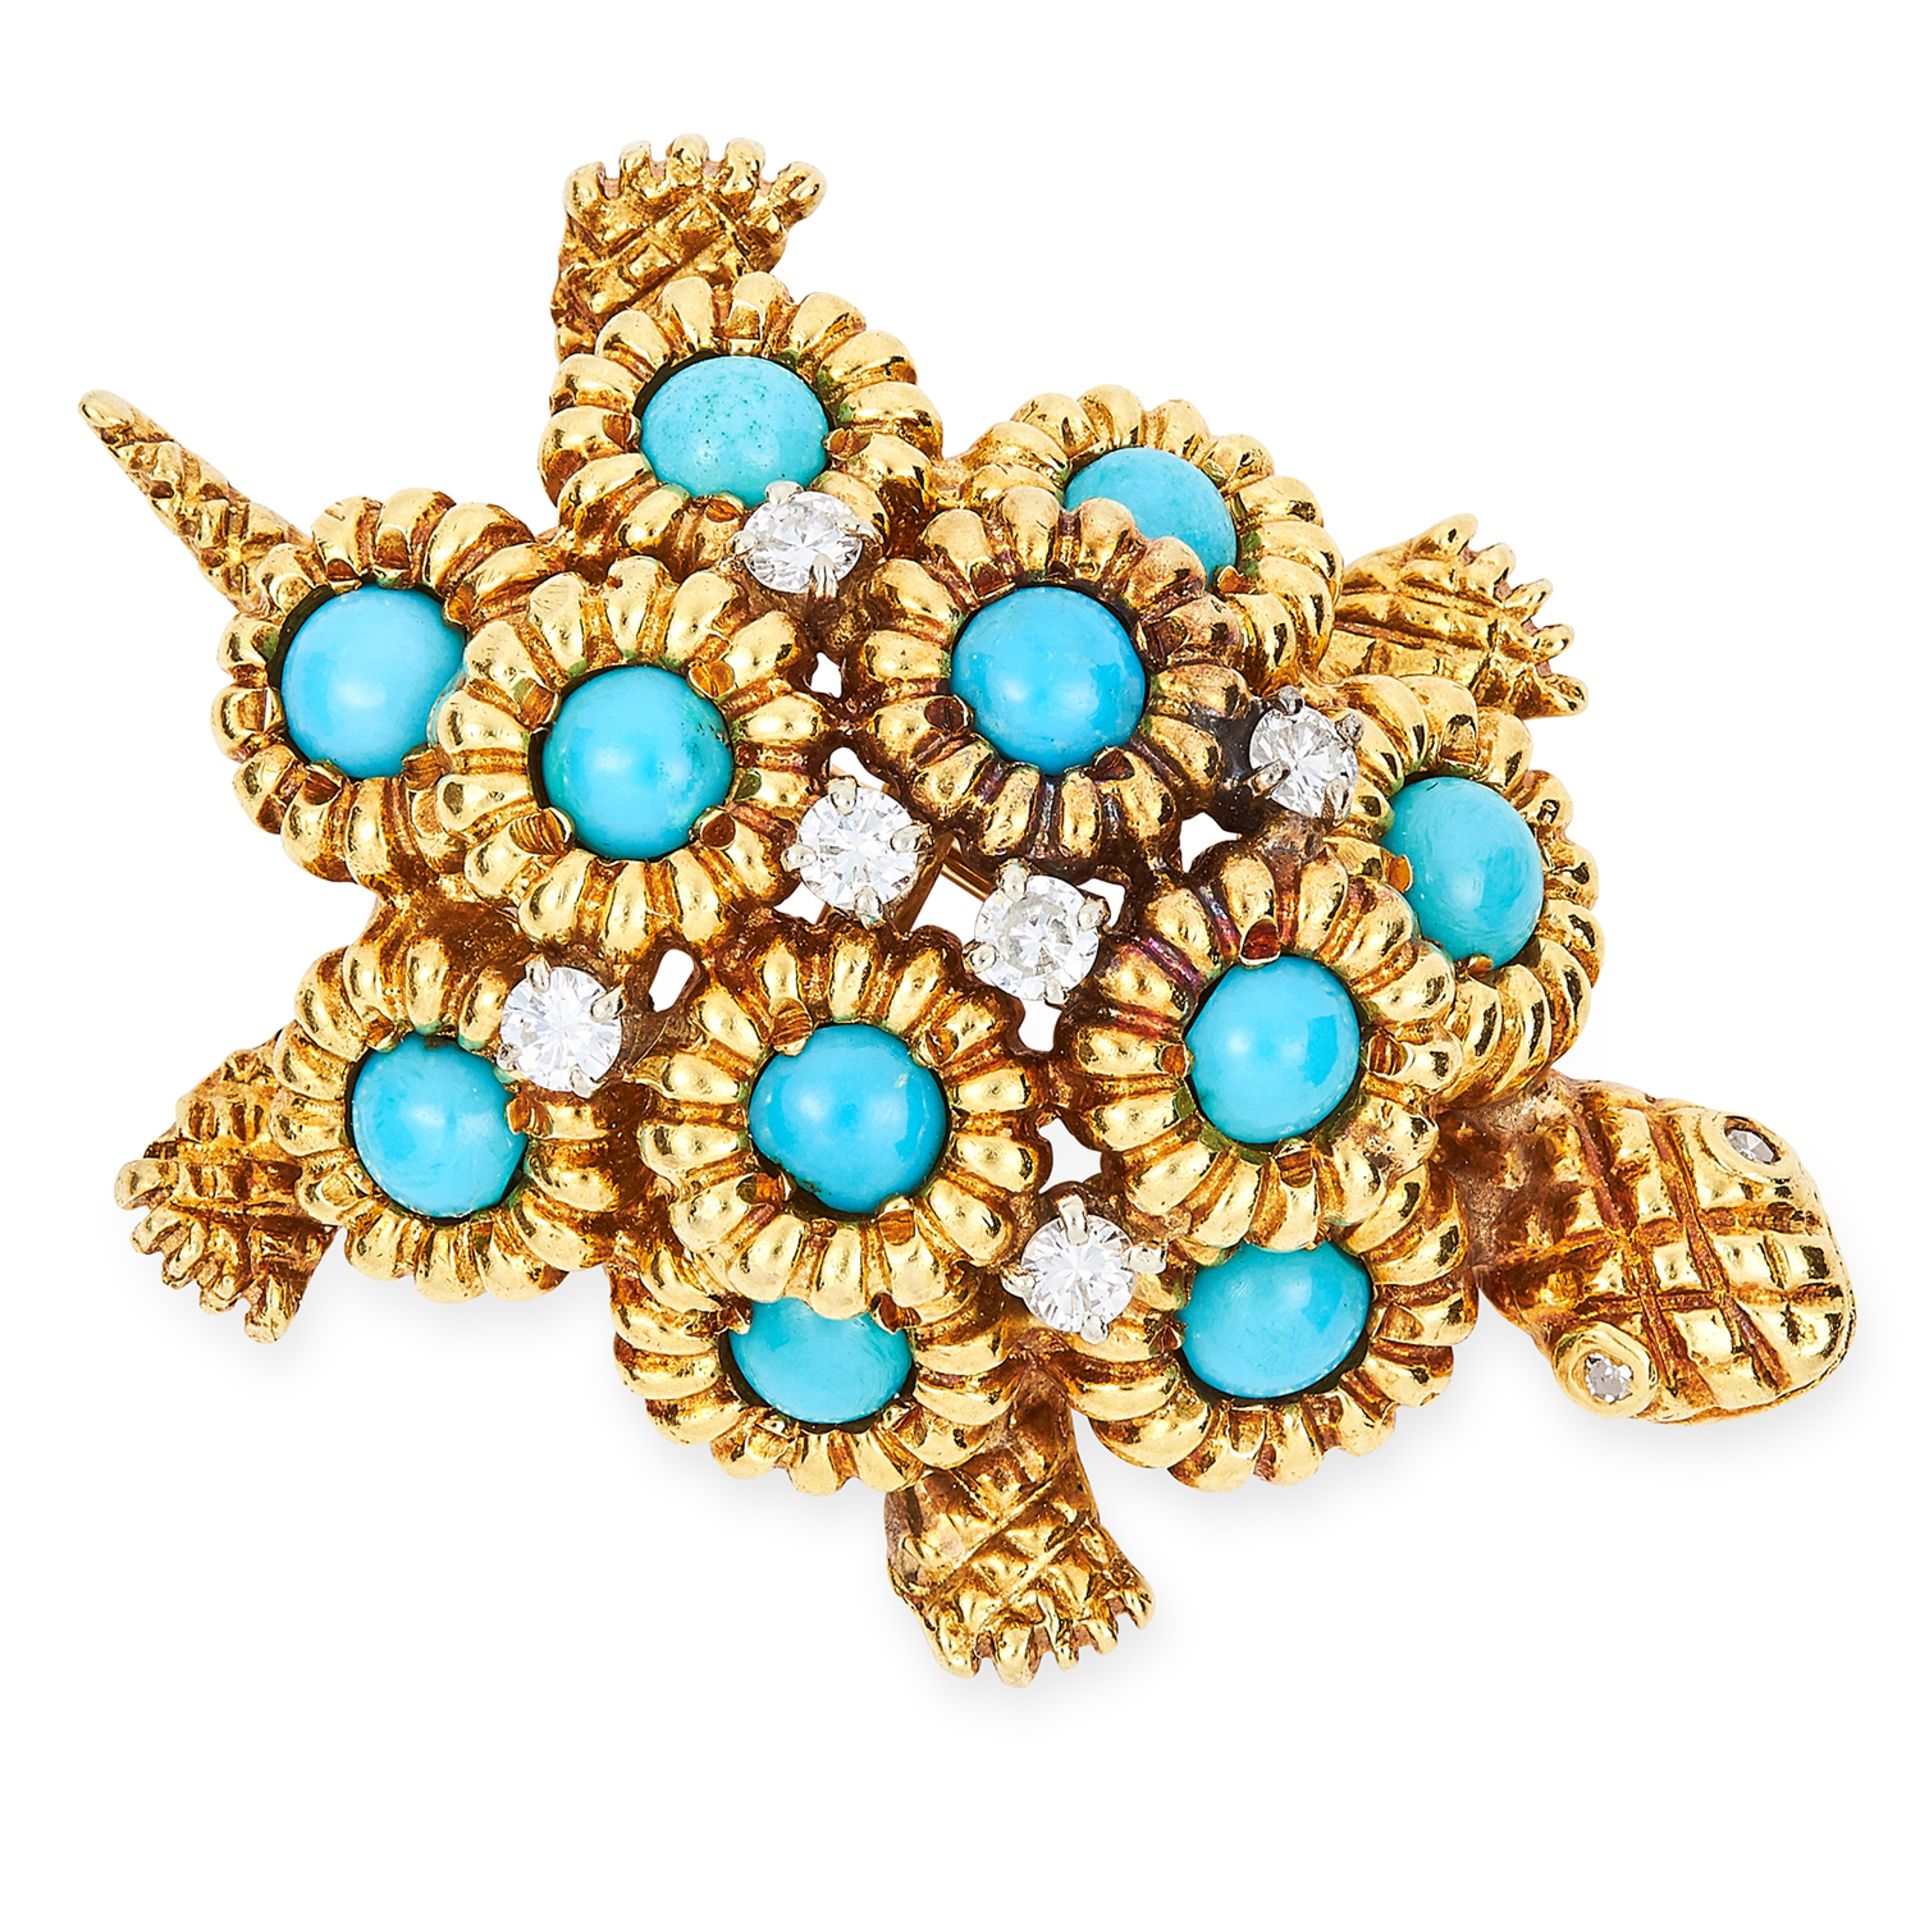 VINTAGE TURQUOISE AND DIAMOND TURTLE BROOCH in 18ct yellow gold, set with cabochon turquoise and